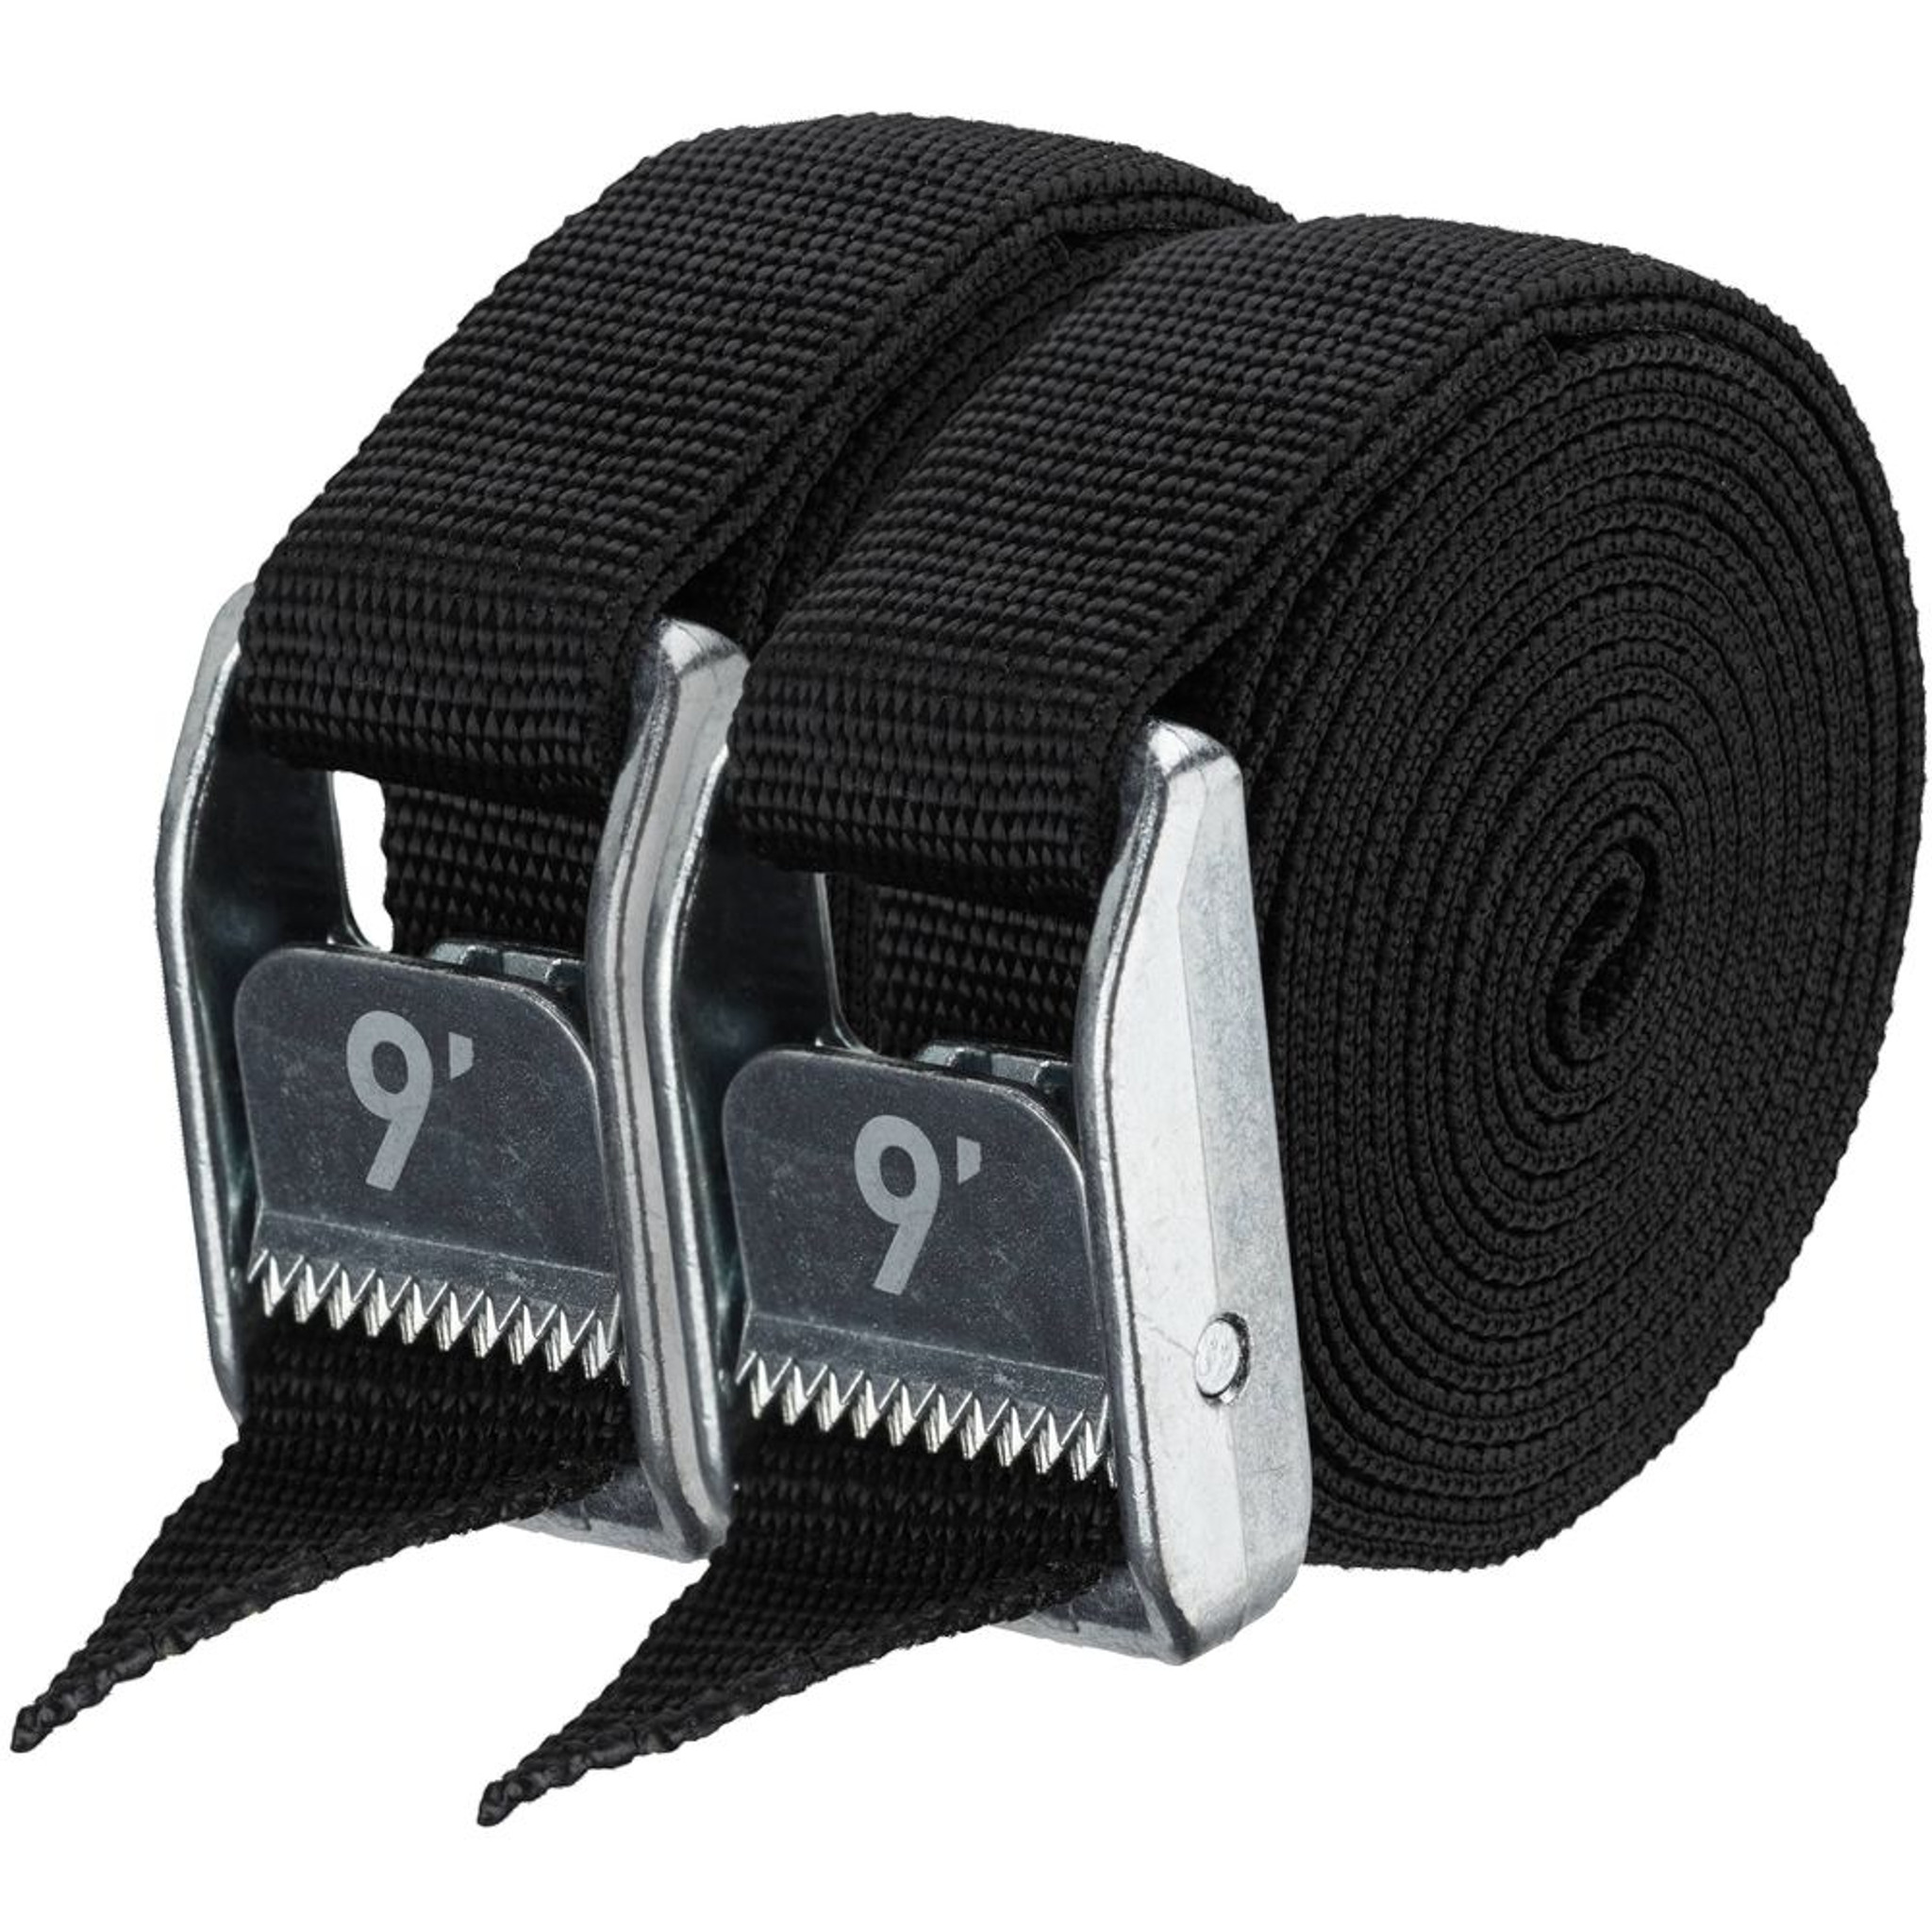 NRS 1 HD Tie-Down Straps - Iconic Blue - 9' Pair